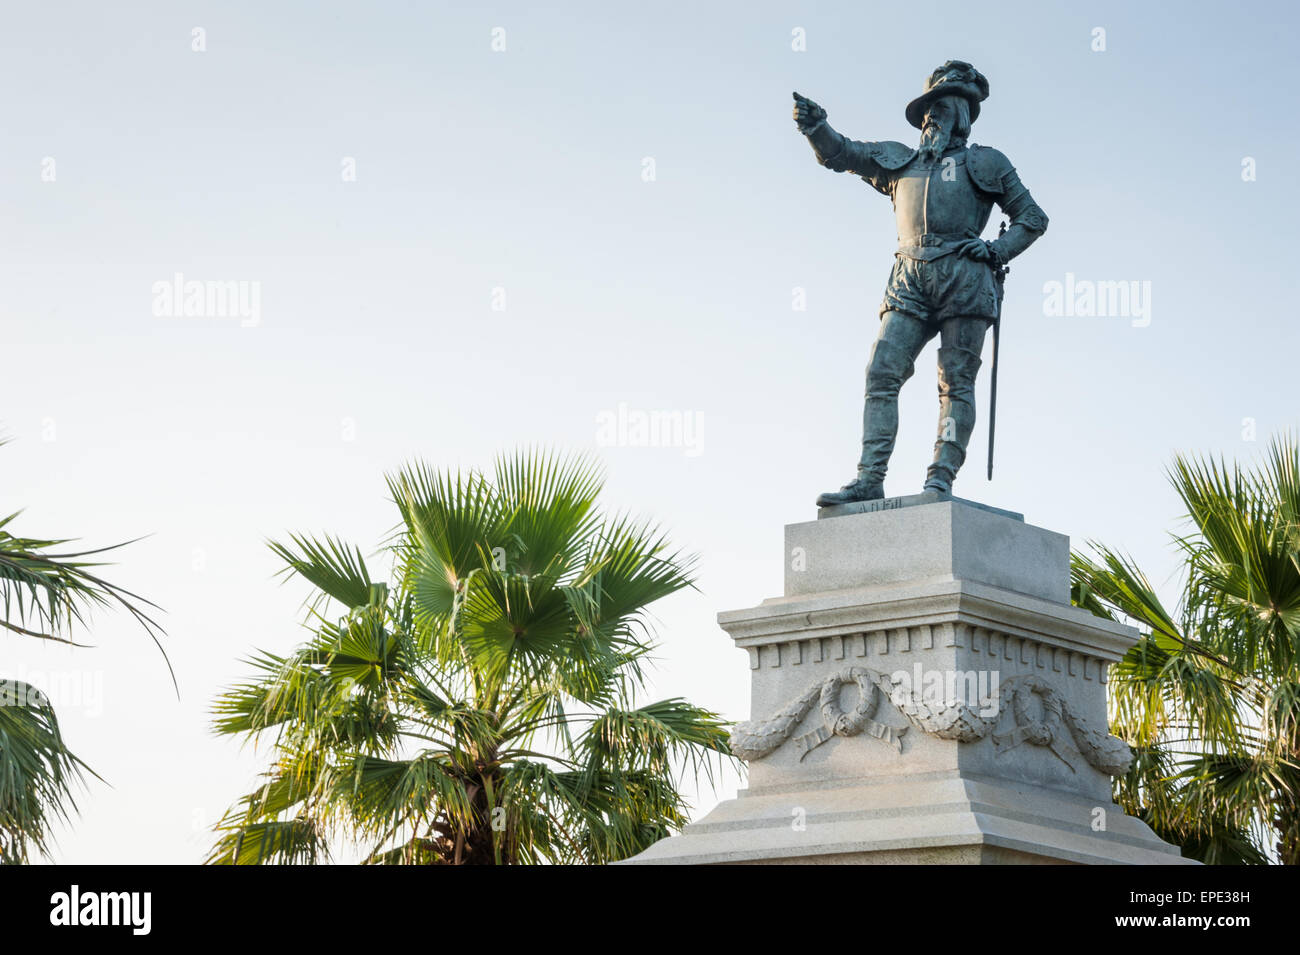 Ponce de Leon statue near the waterfront in Old Town St. Augustine, Florida, USA. Stock Photo